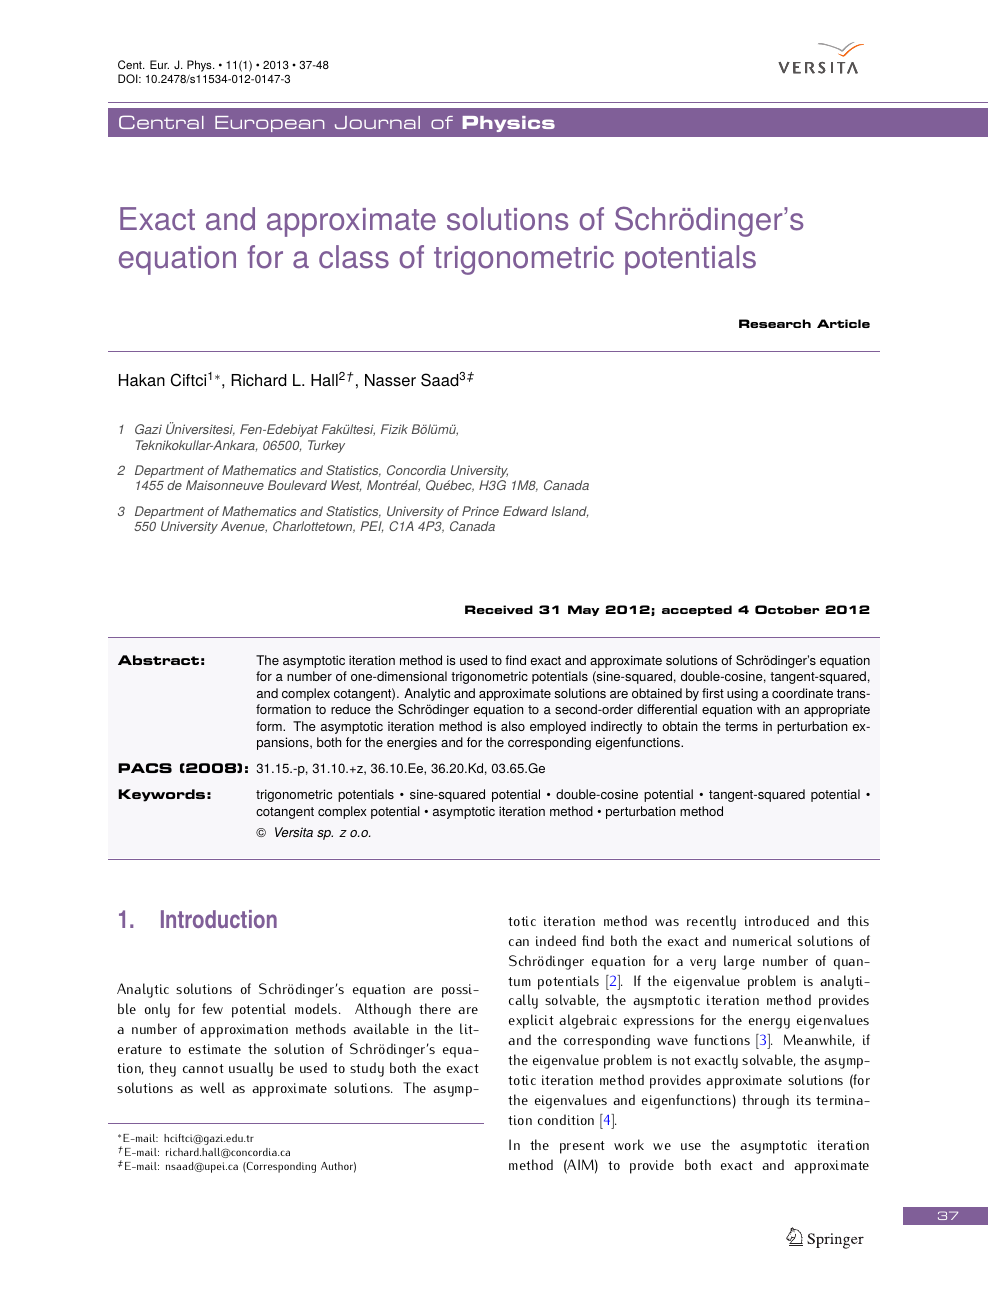 Exact And Approximate Solutions Of Schrodinger S Equation For A Class Of Trigonometric Potentials Topic Of Research Paper In Physical Sciences Download Scholarly Article Pdf And Read For Free On Cyberleninka Open